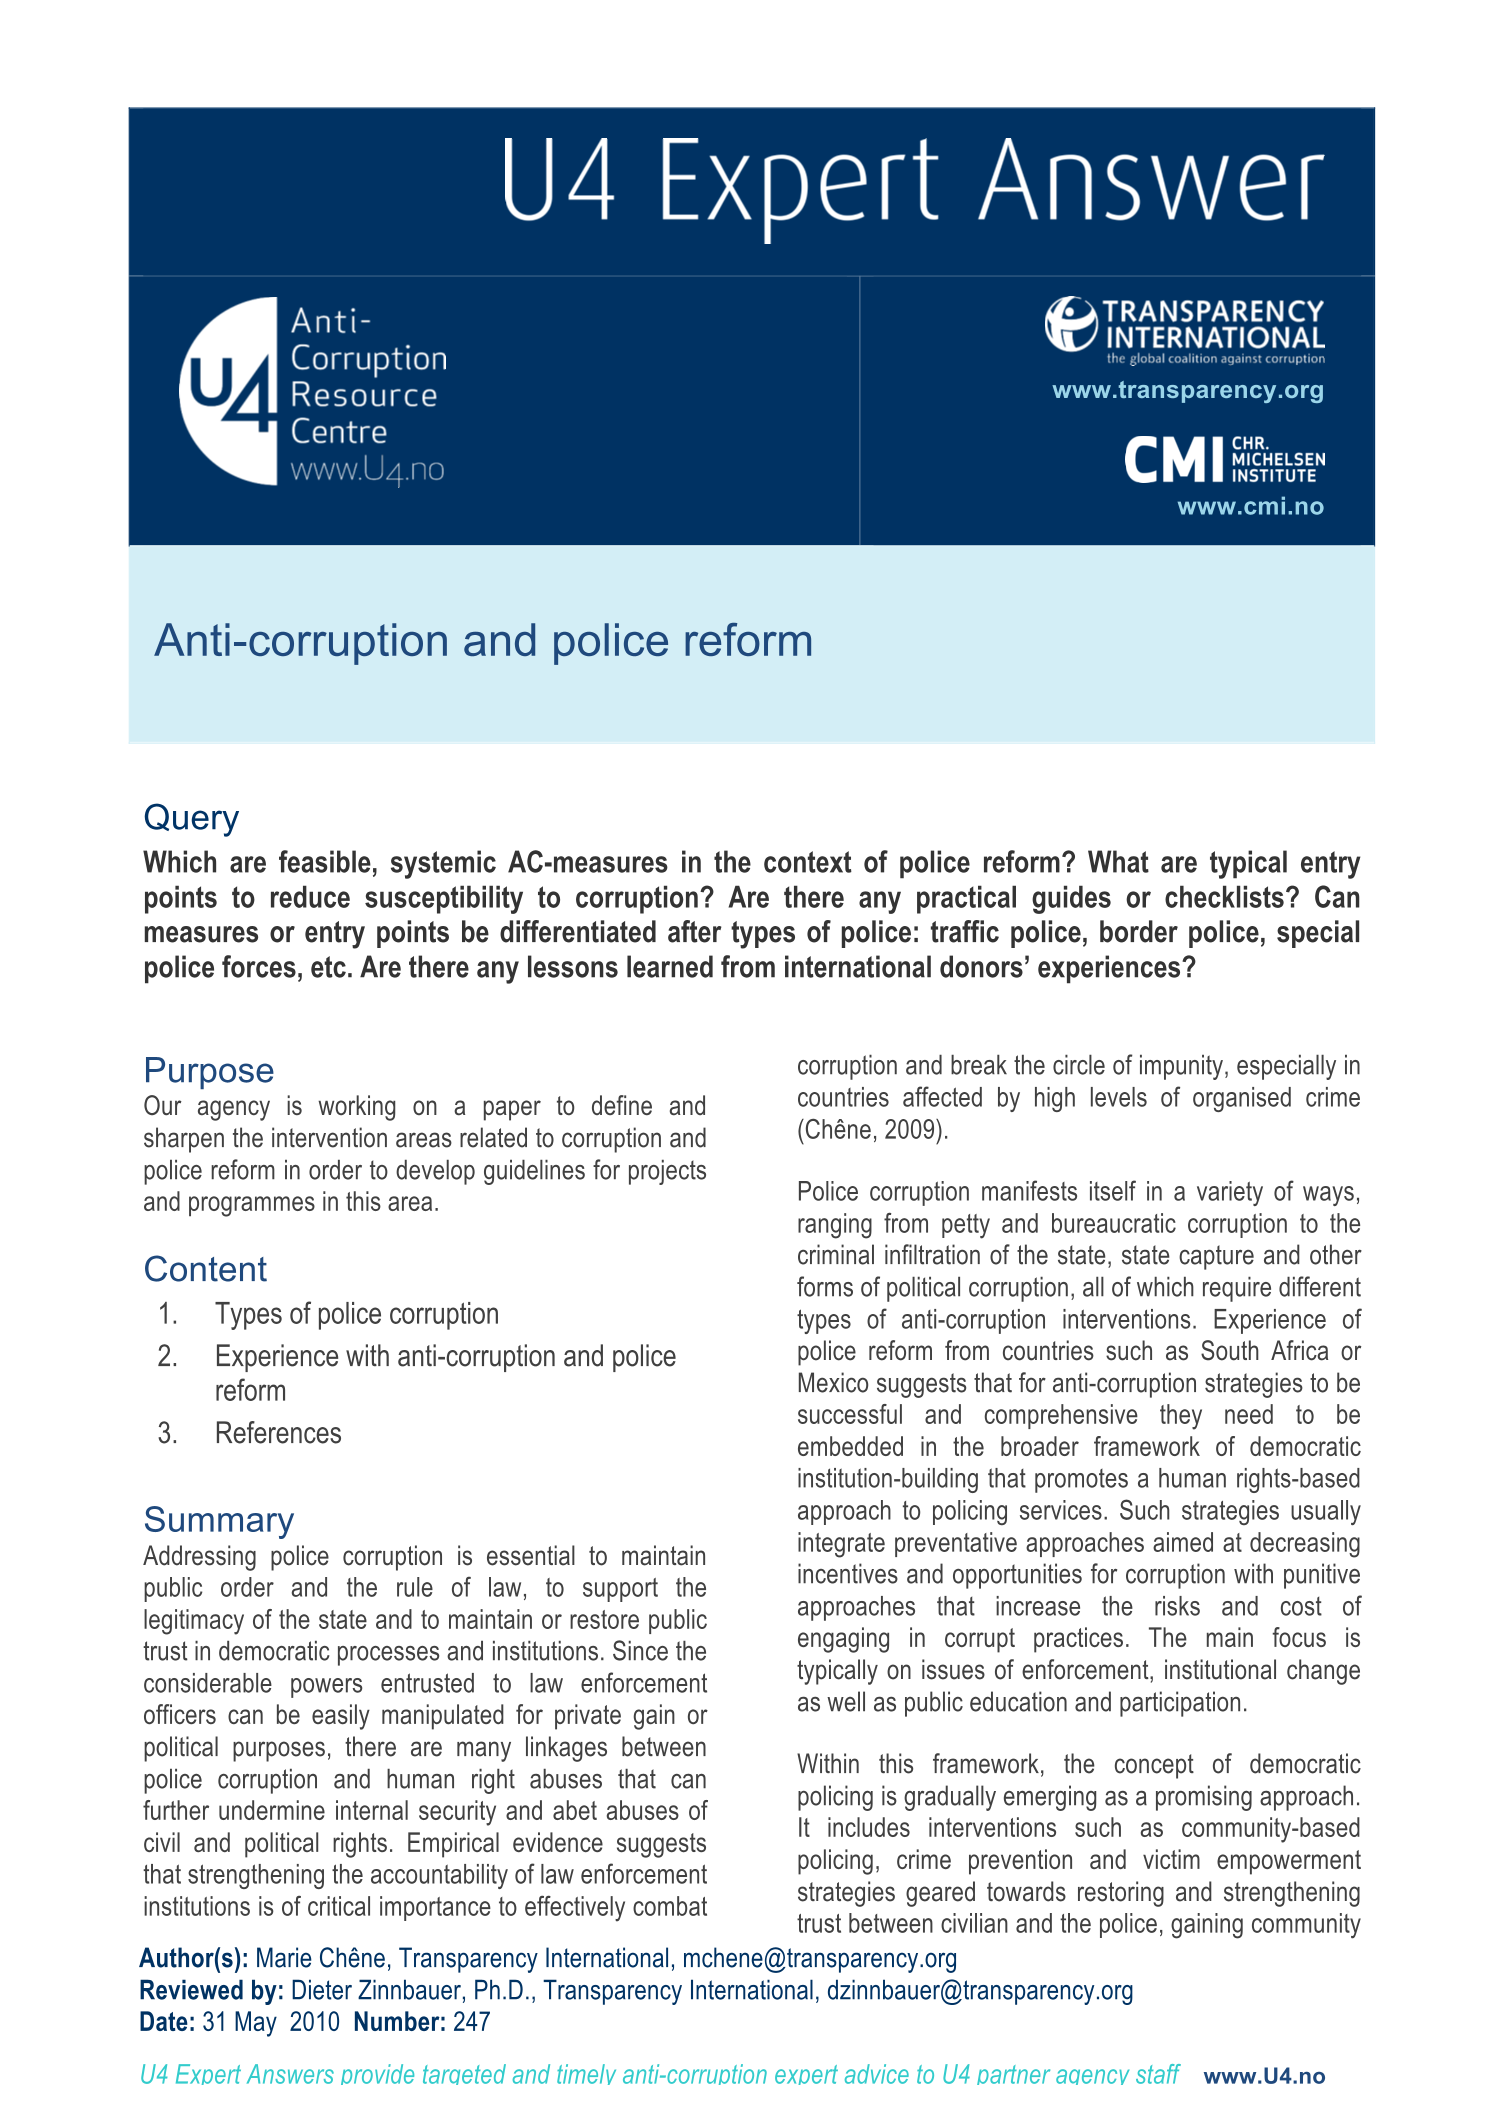 Anti-corruption and police reform